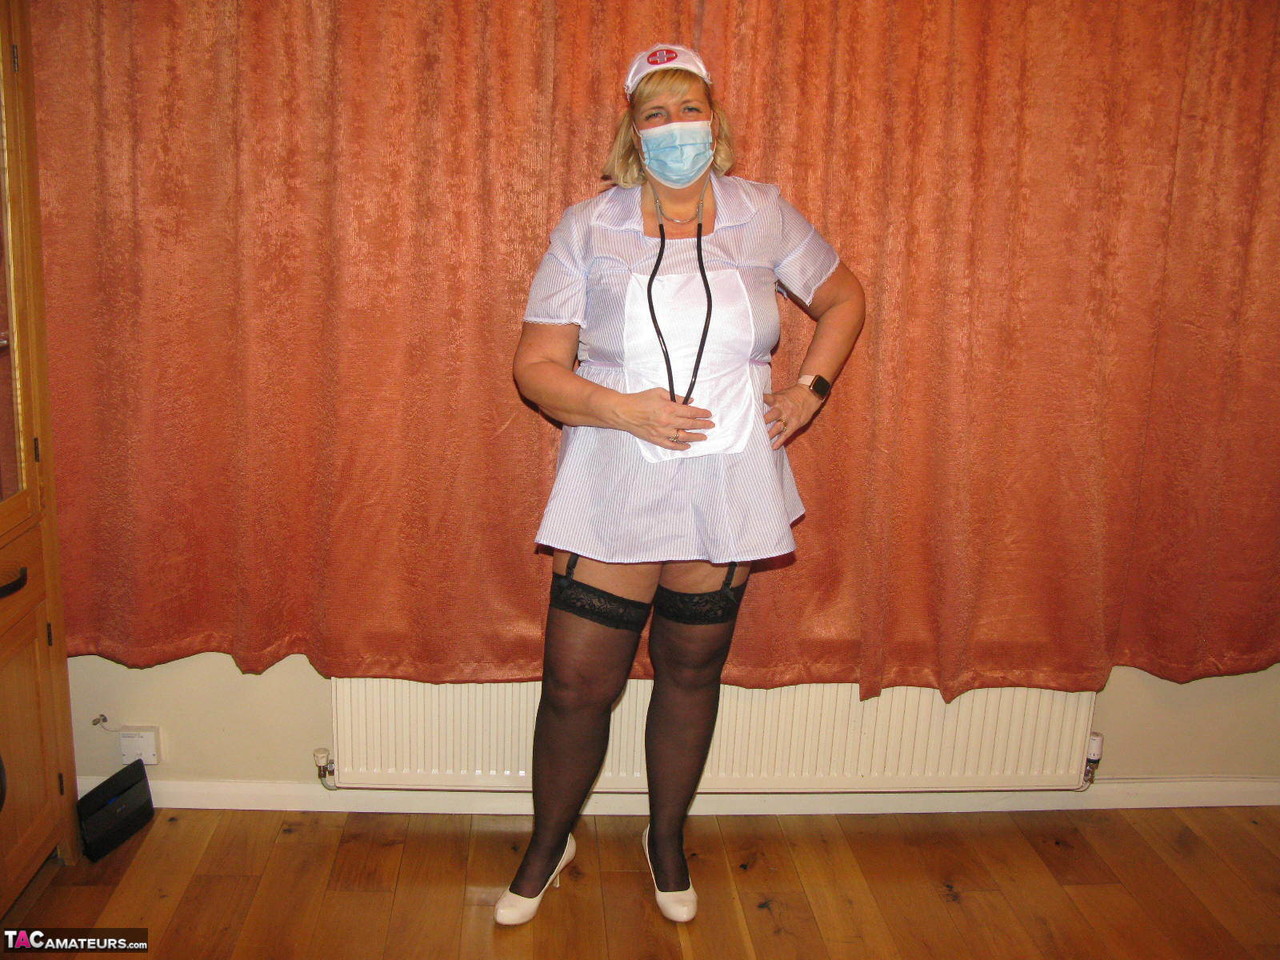 Fat nurse Chrissy Uk removes a surgical mask and uniform to model lingerie 포르노 사진 #424682137